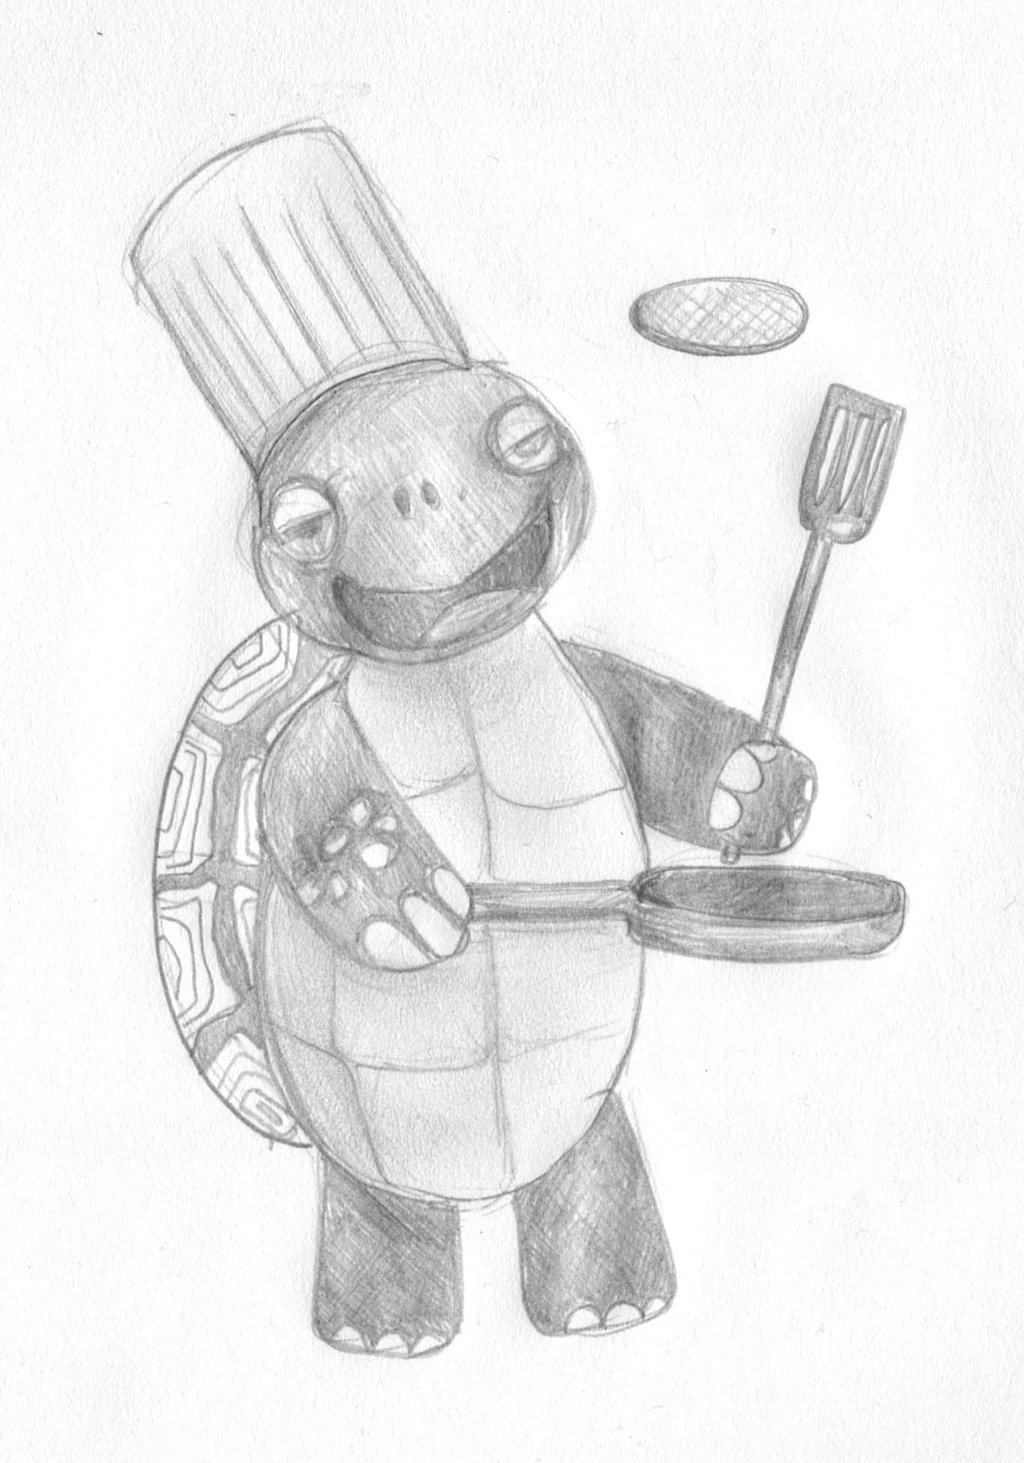 A very special turtle cooking pancakes while wearing a chef hat